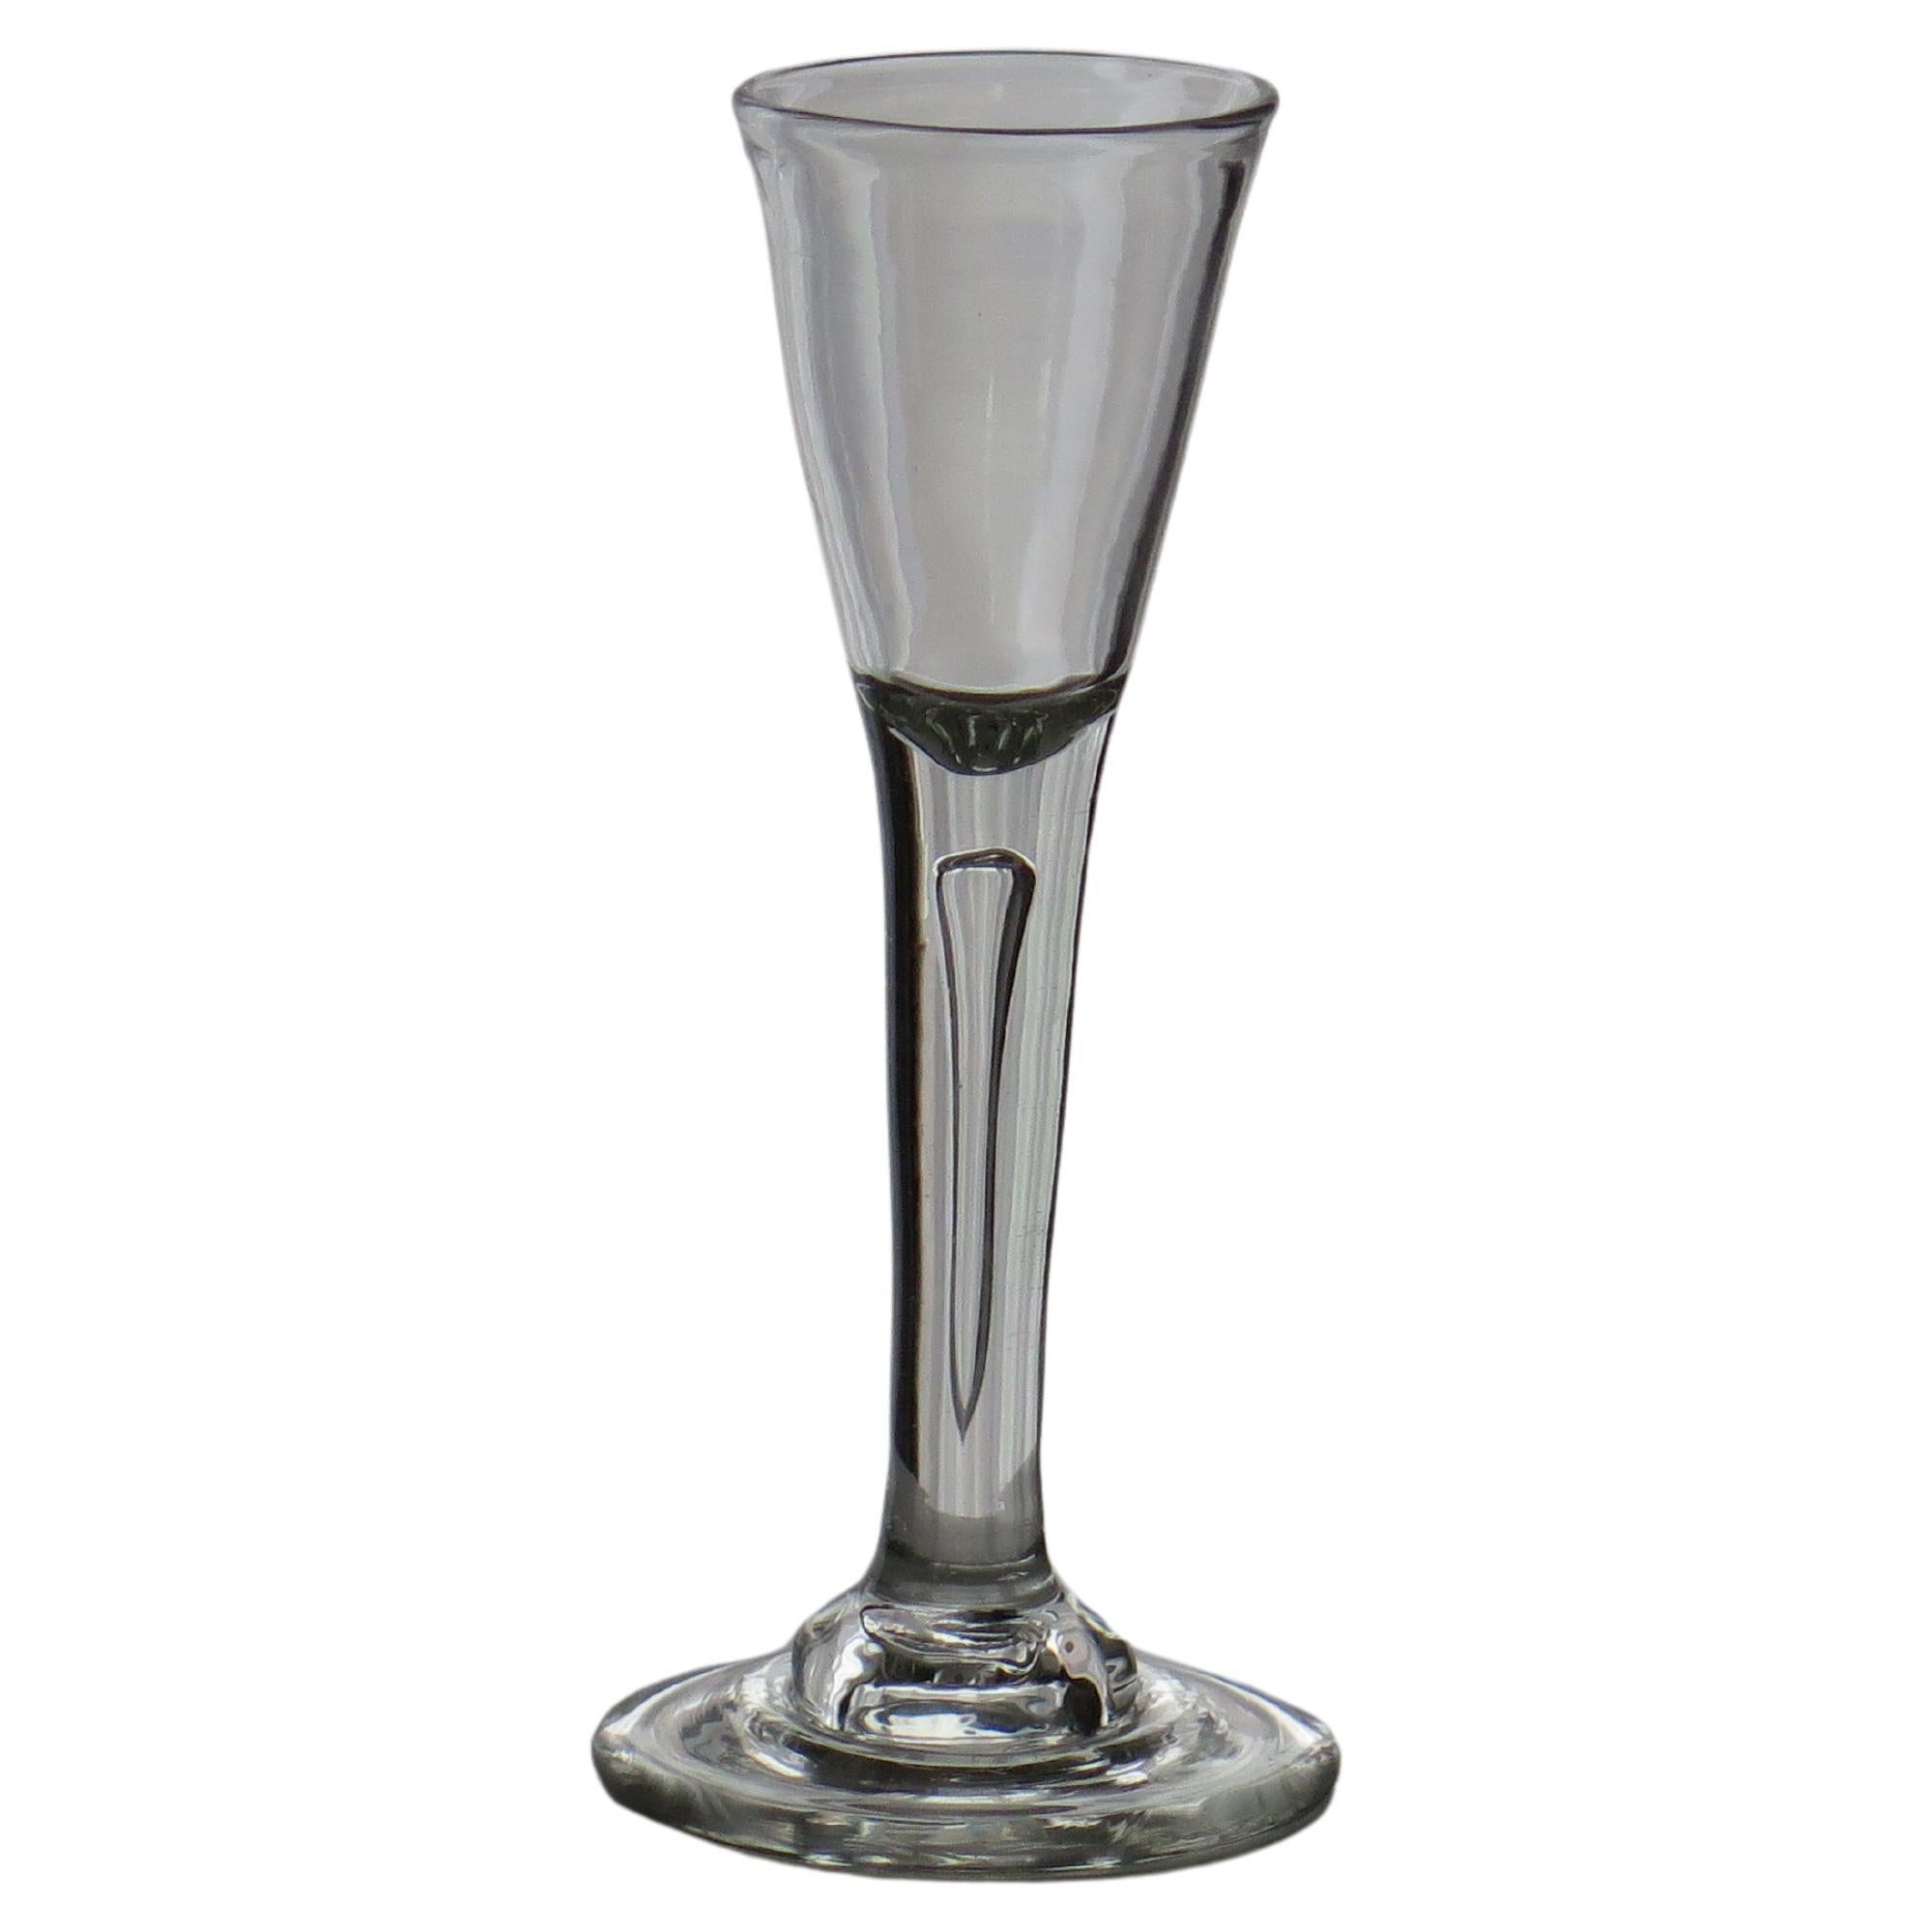 This is a very good, tall, English, mid-Georgian, hand blown, wine drinking glass, dating to the George II period of the mid-18th century, circa 1740.

These 18th Century hand blown drinking glasses are uniquely individual and very